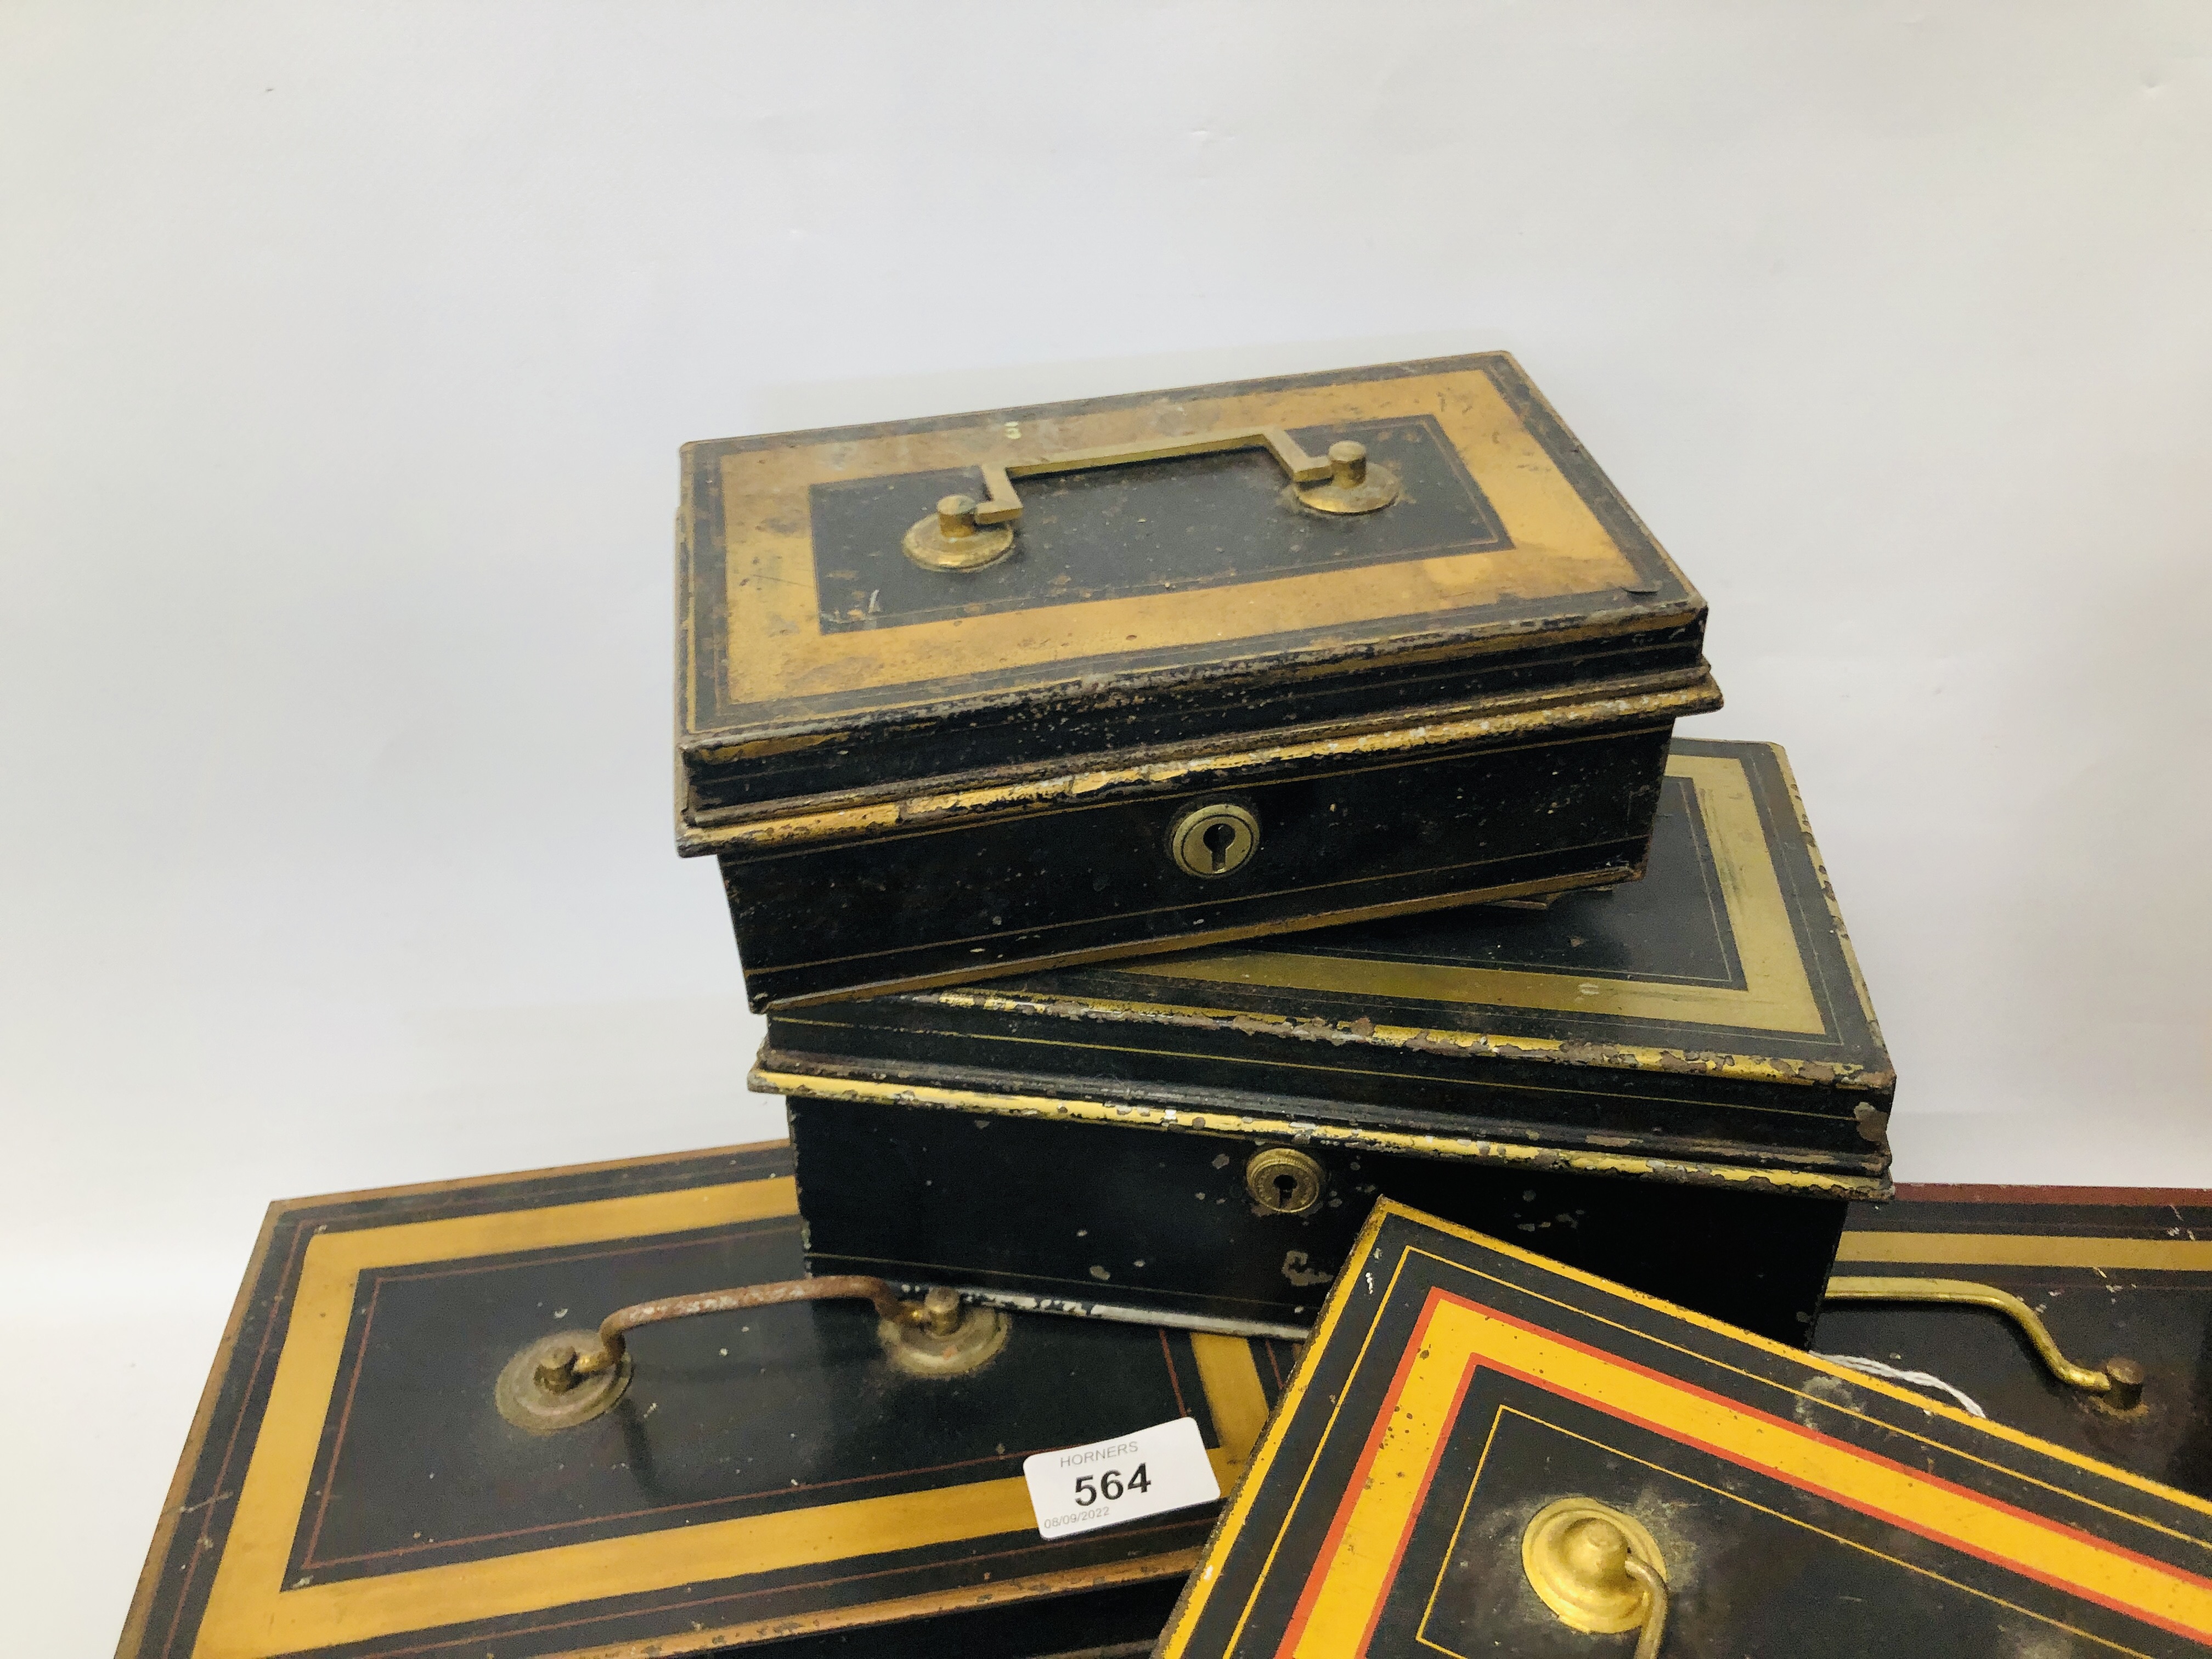 7 JACKSONS OF PICCADILLY TEA TINS ALONG WITH 8 VINTAGE BLACK AND GOLD TONE CASH TINS - Image 5 of 6